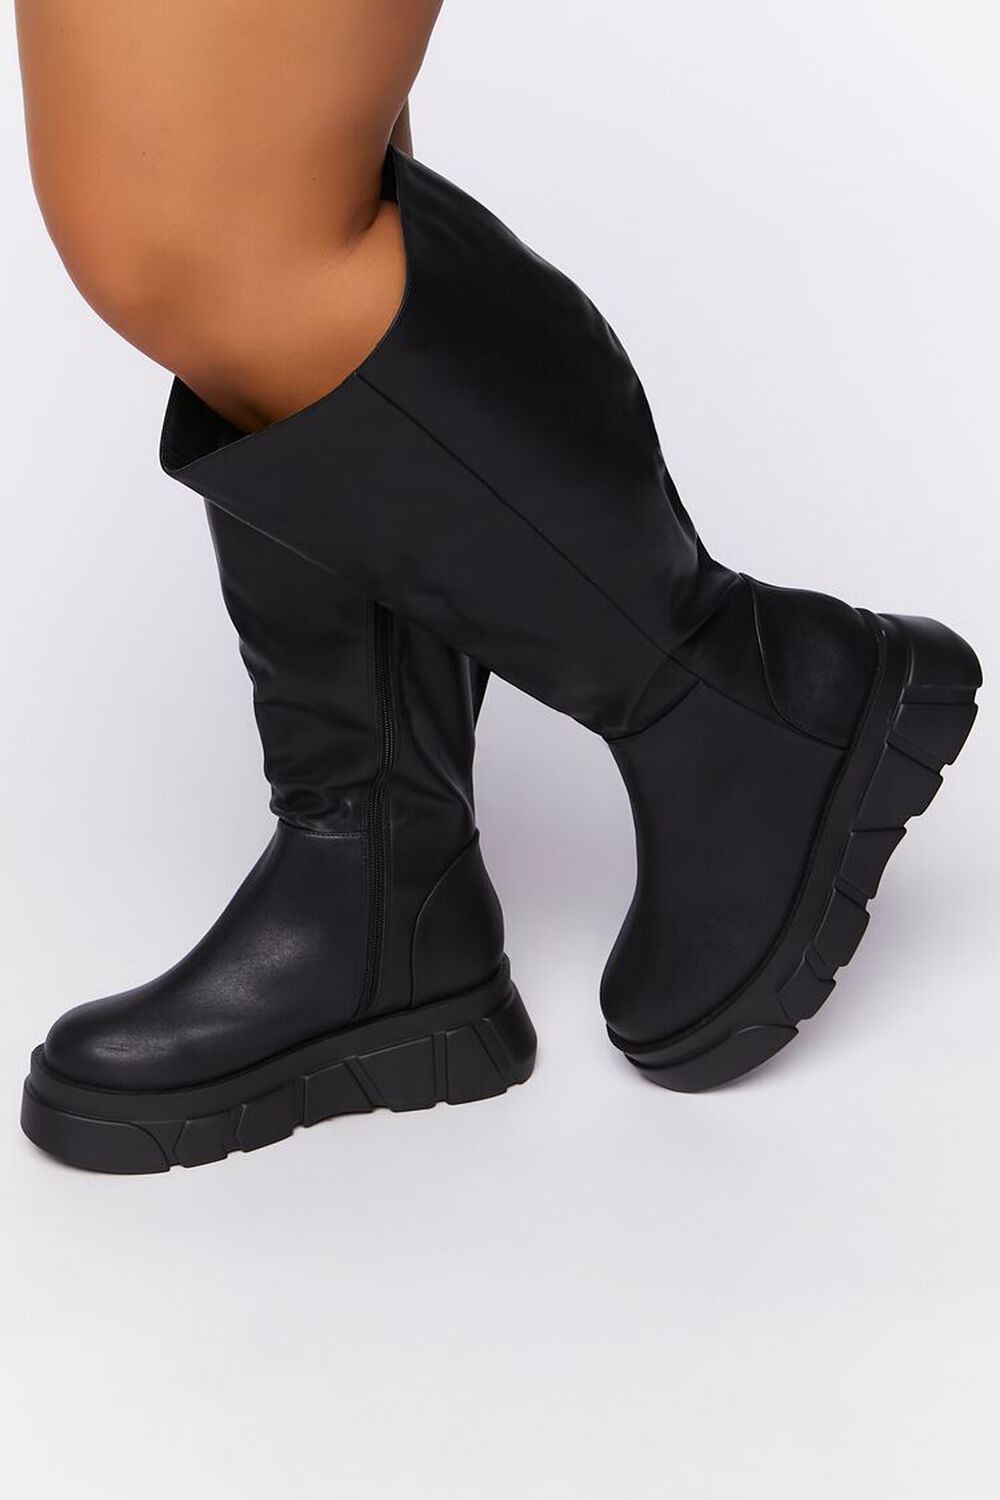 BLACK Faux Leather Calf-High Boots (Wide), image 1